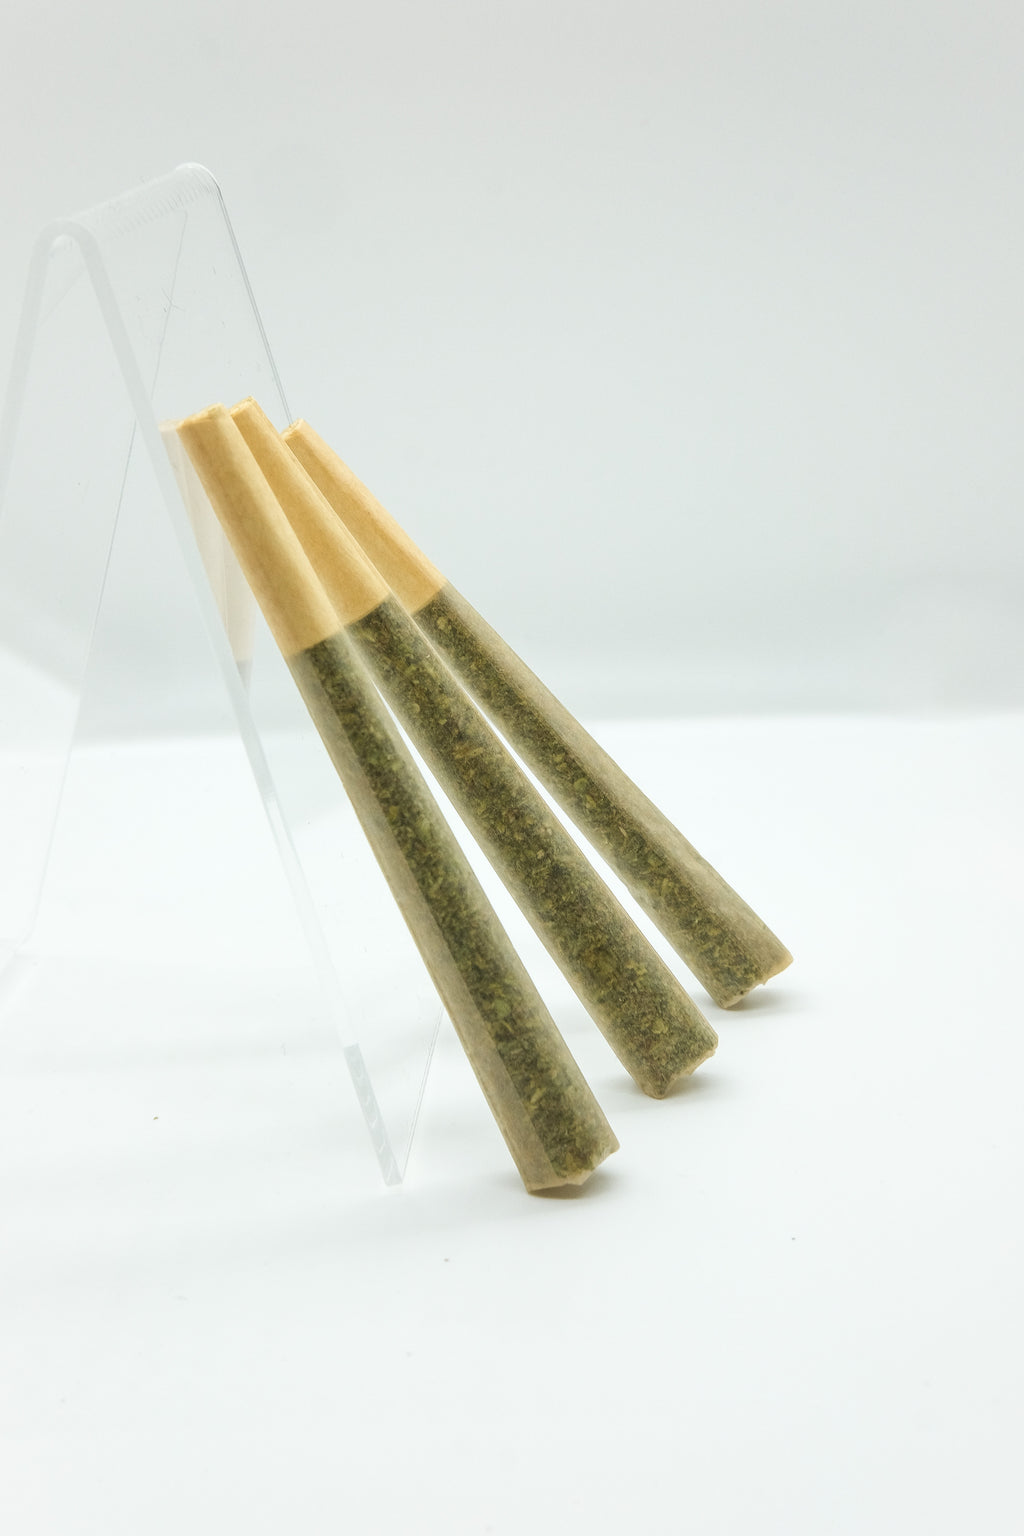 Three pre rolls leaning on a clear acrylic stand on a white background 